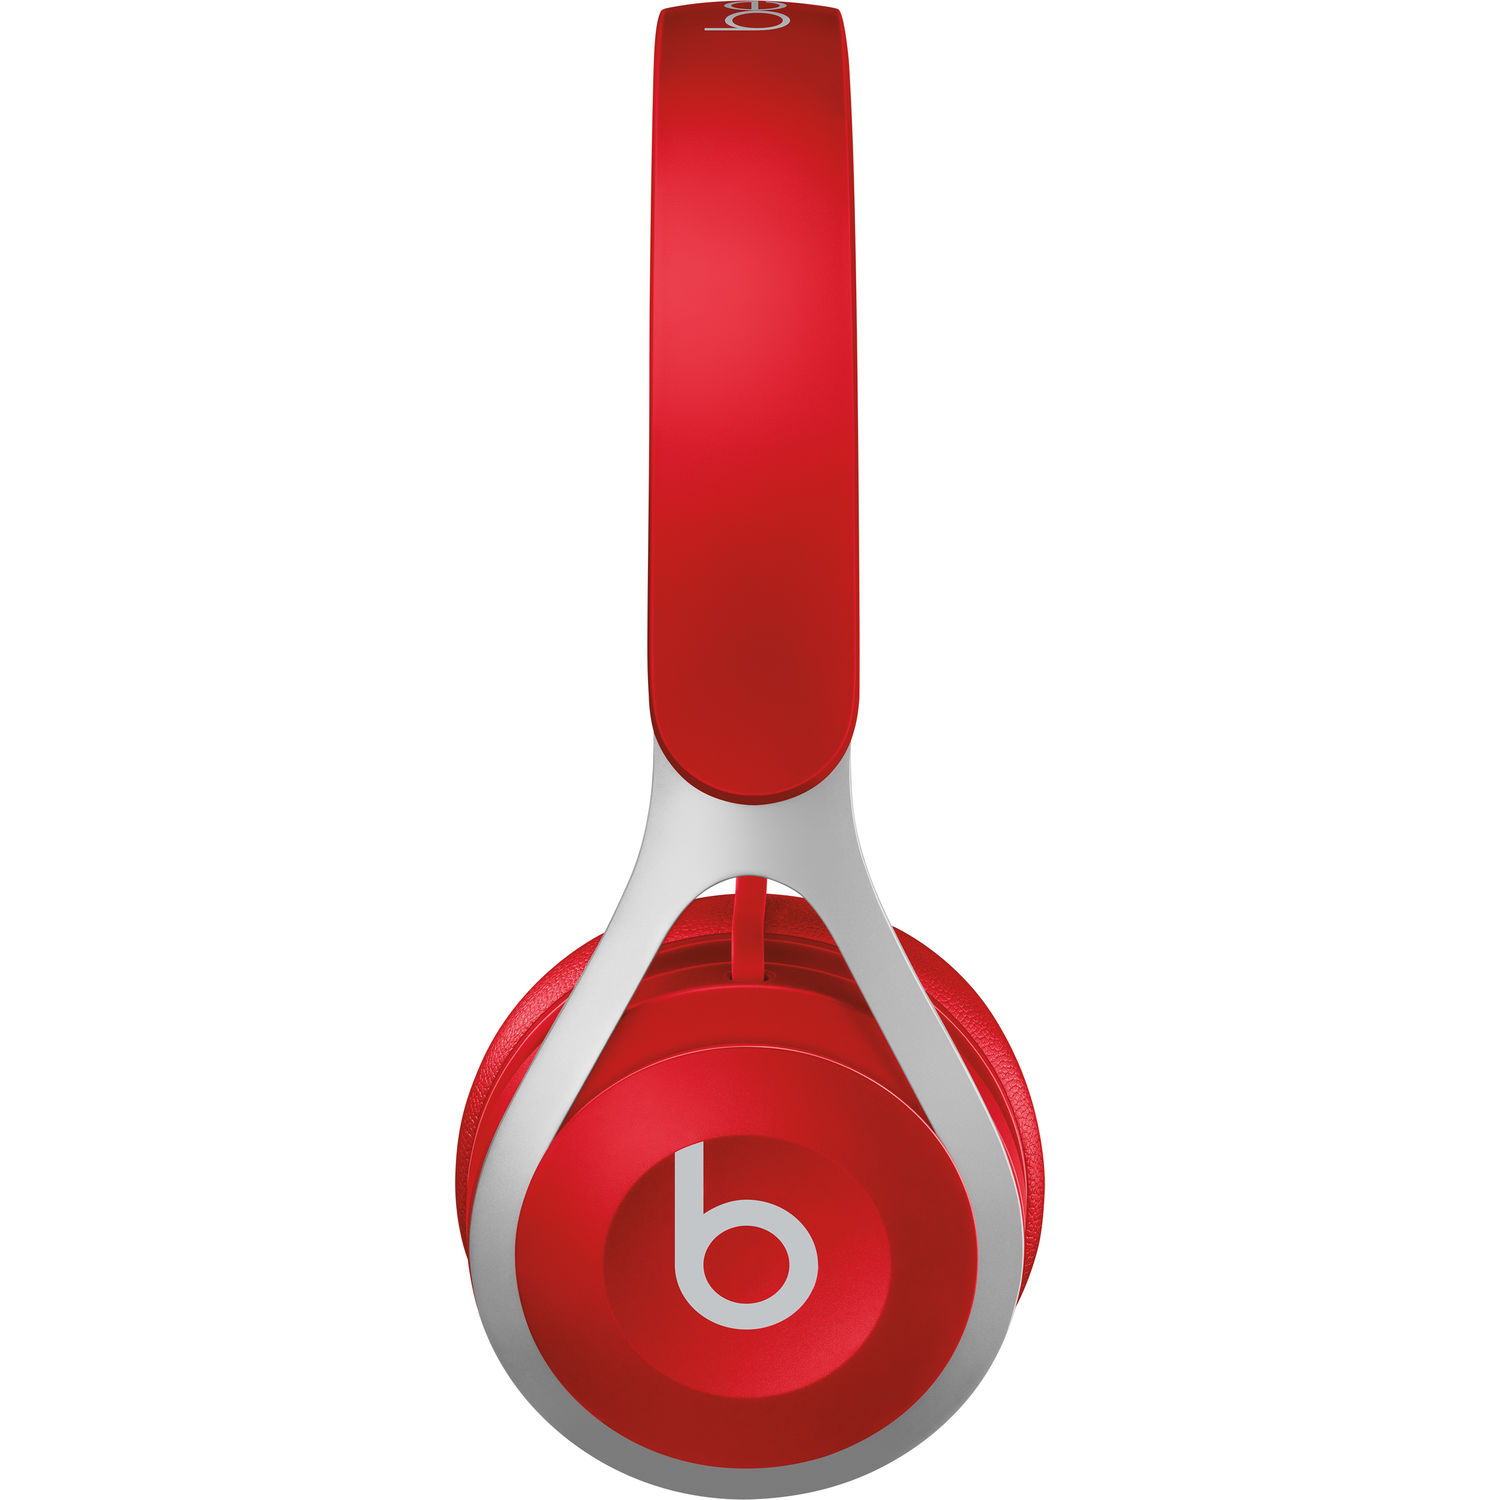 Beats EP Wired On-Ear Headphones (ML9C2ZM/A) - Battery Free for Unlimited Listening, Built in Mic and Controls - (Red) - image 5 of 6